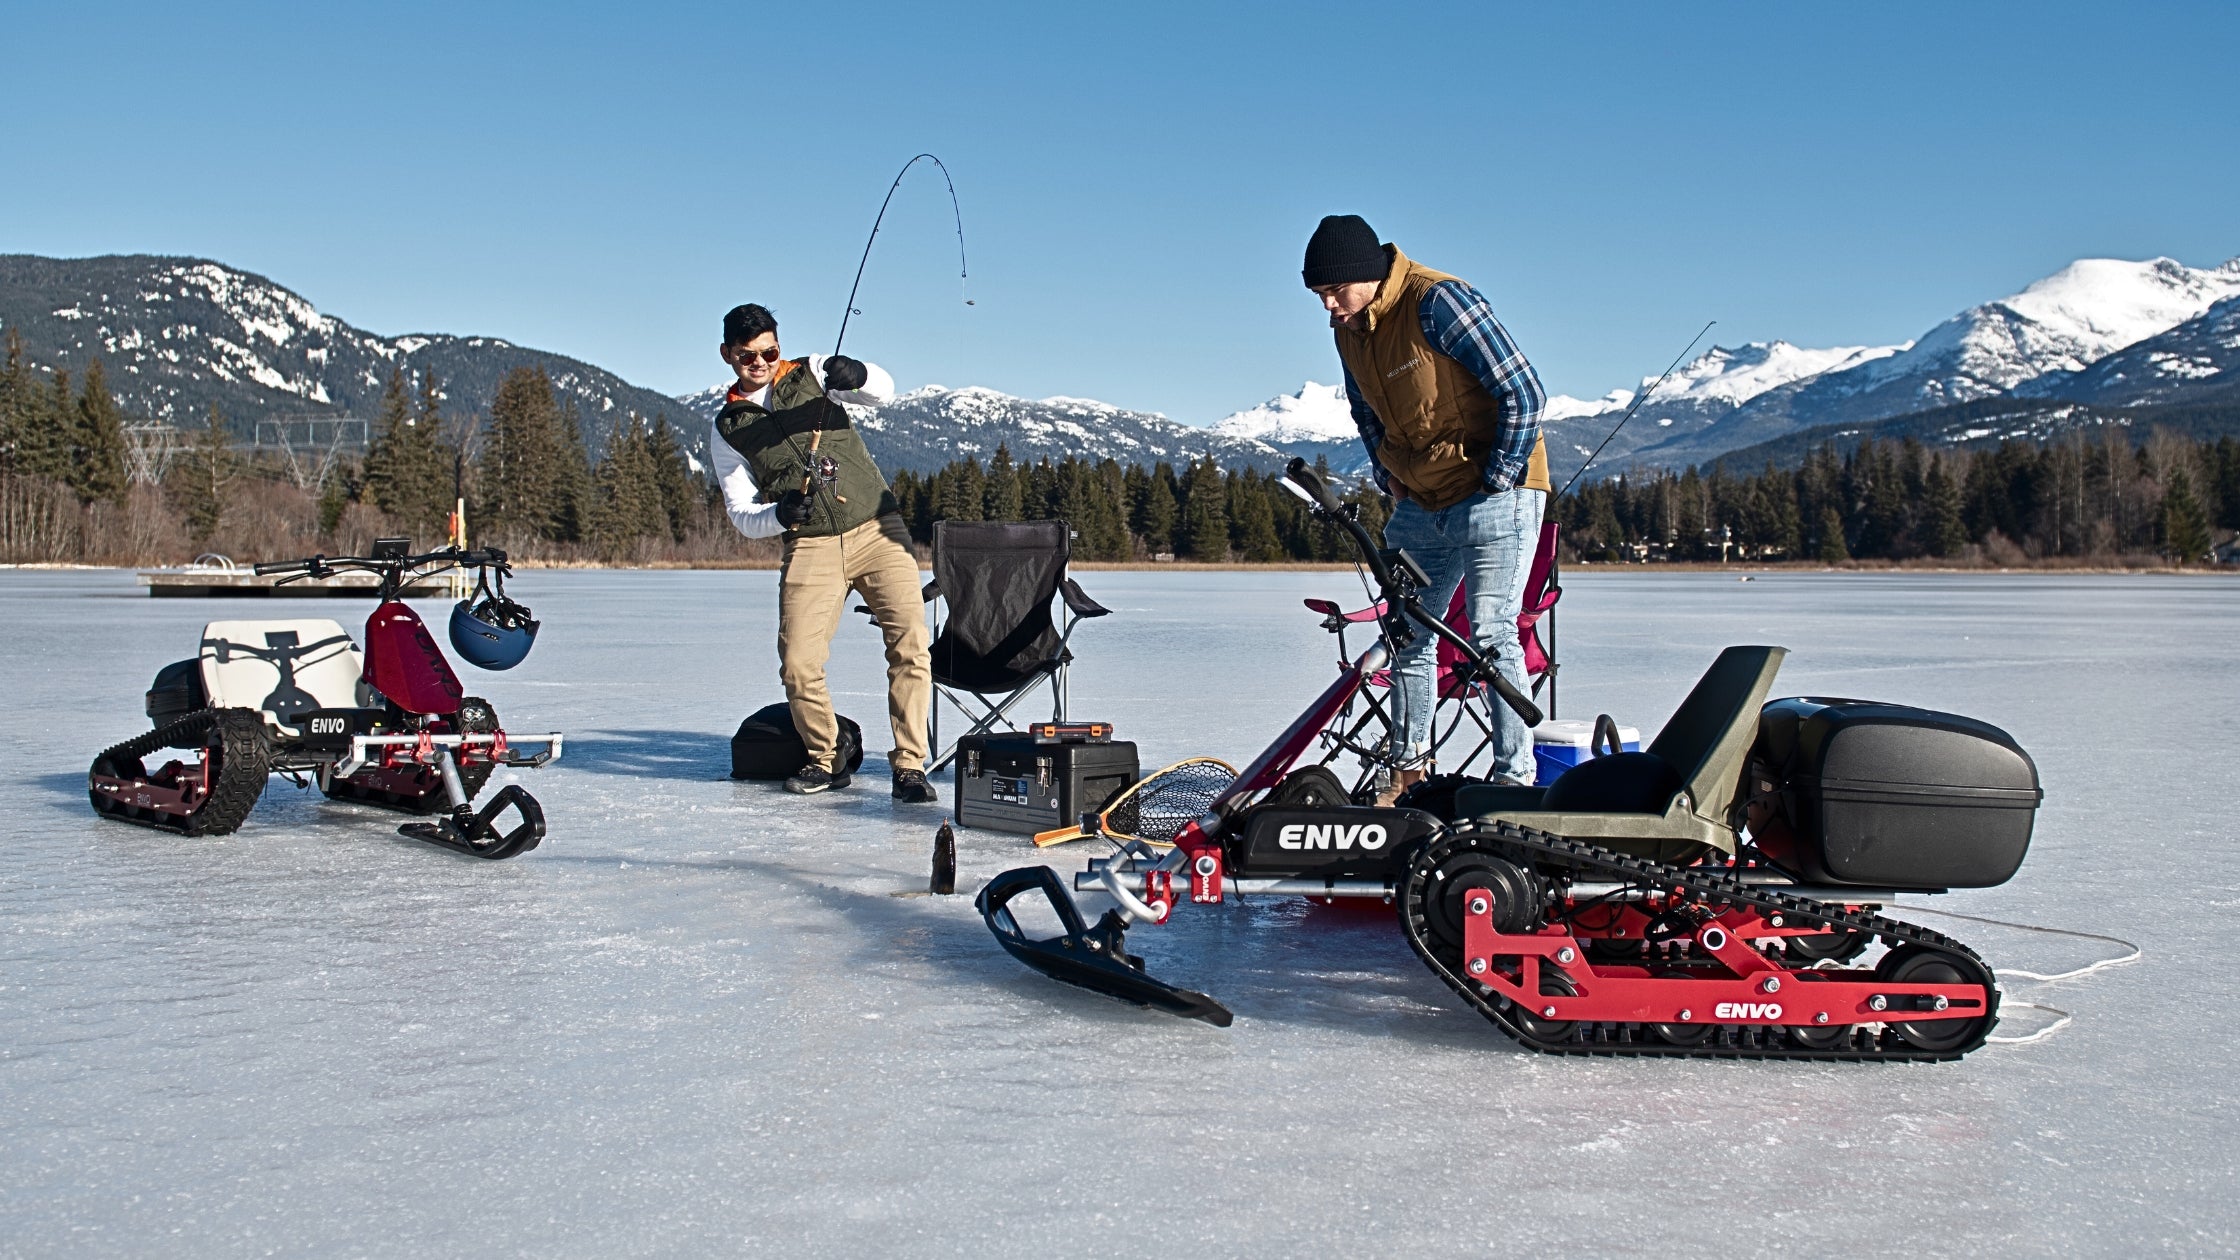 ENVO electric Sled, SnowKart: The Ultimate Winter Fun for All!